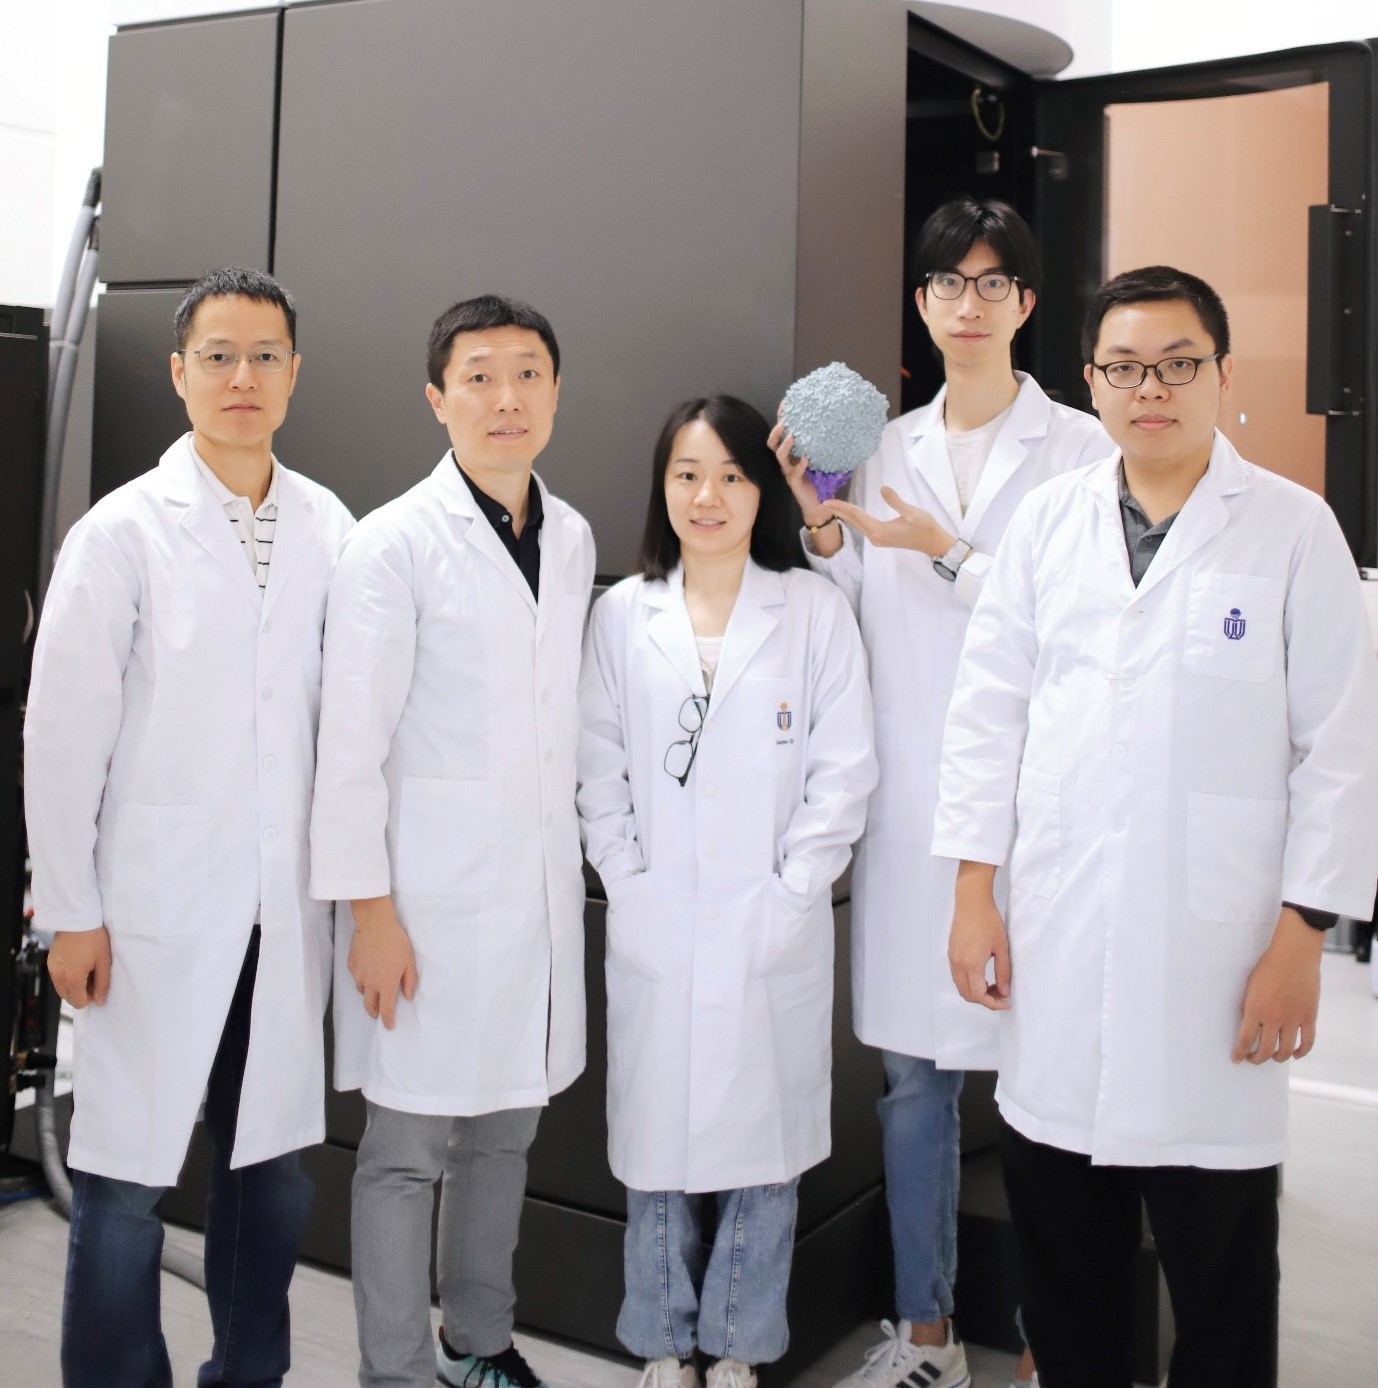 Photo of the research team, featuring Prof. DANG Shangyu, Prof. ZENG Qinglu, Dr. CAI Lanlan, Mr. LIU Hang (With the 3D printed cyanophage structure in his hands), and Mr. XIAO Shiwei, from left to right.